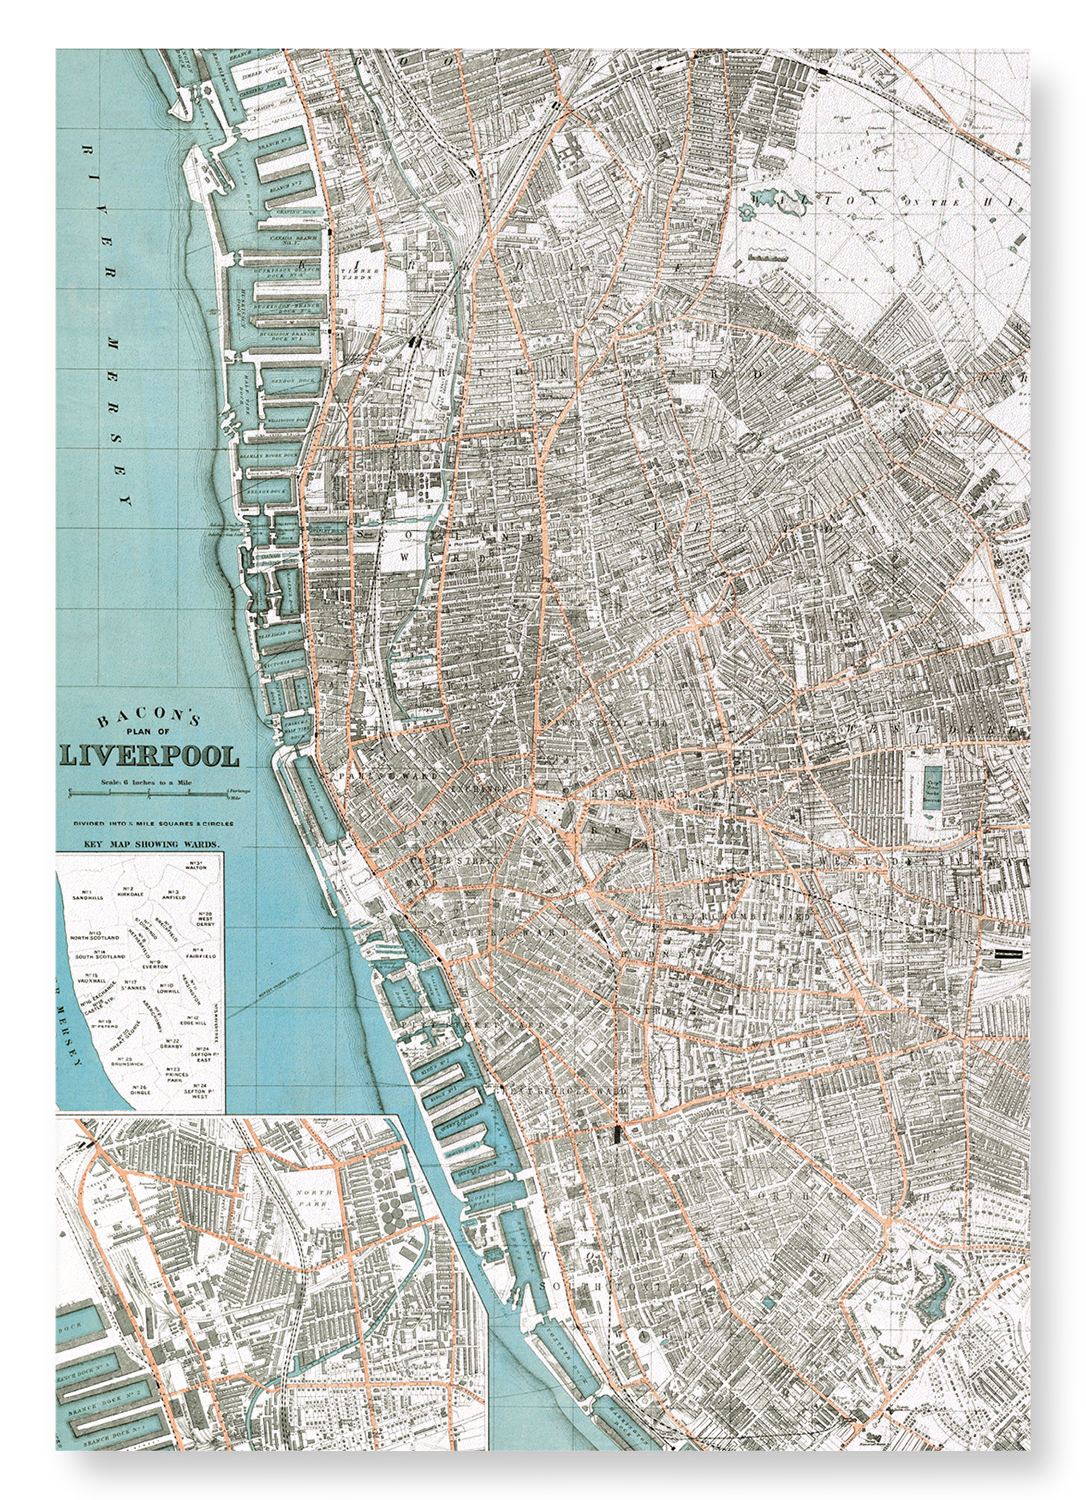 MAP OF LIVERPOOL (C.1885)